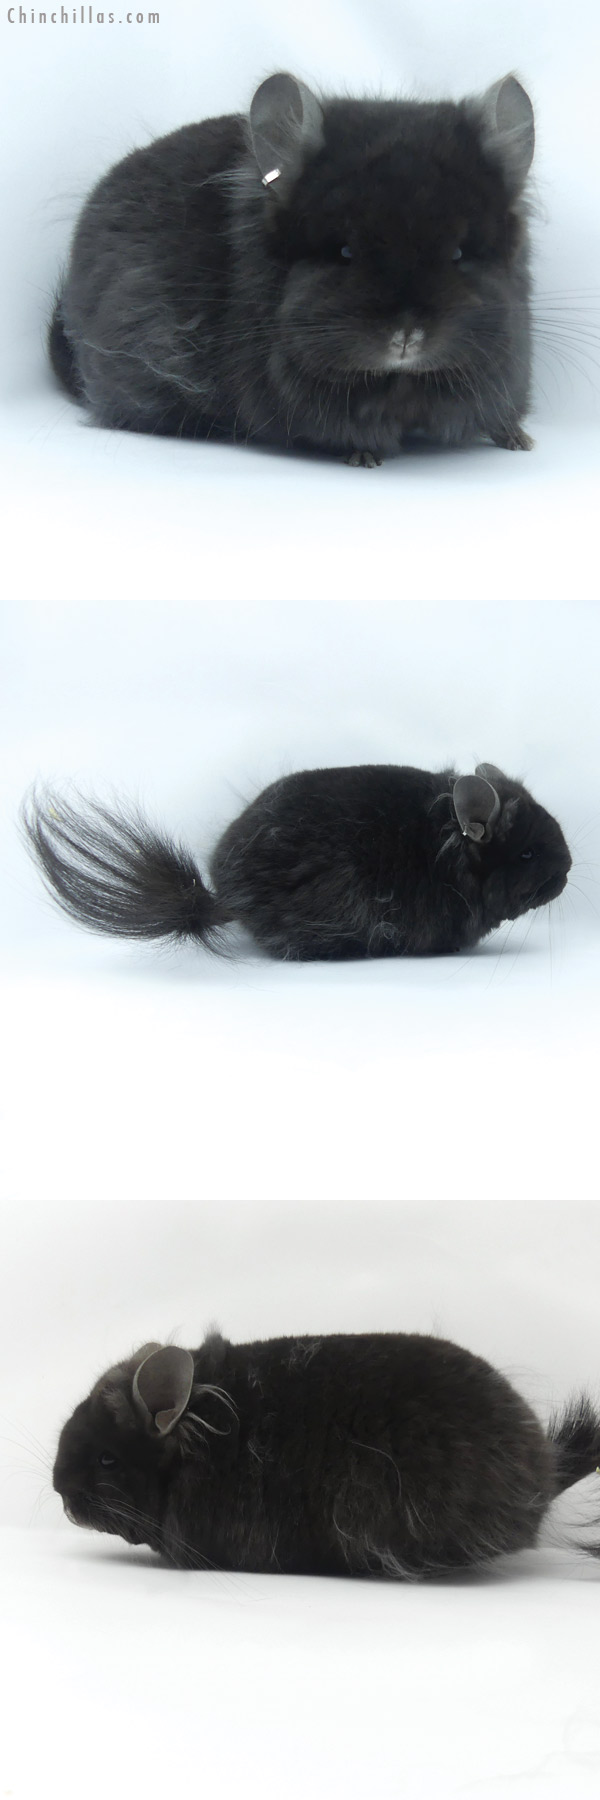 Chinchilla or related item offered for sale or export on Chinchillas.com - 19420 Exceptional Blocky Brevi Type Ebony ( Locken Carrier ) G2  Royal Persian Angora Female Chinchilla